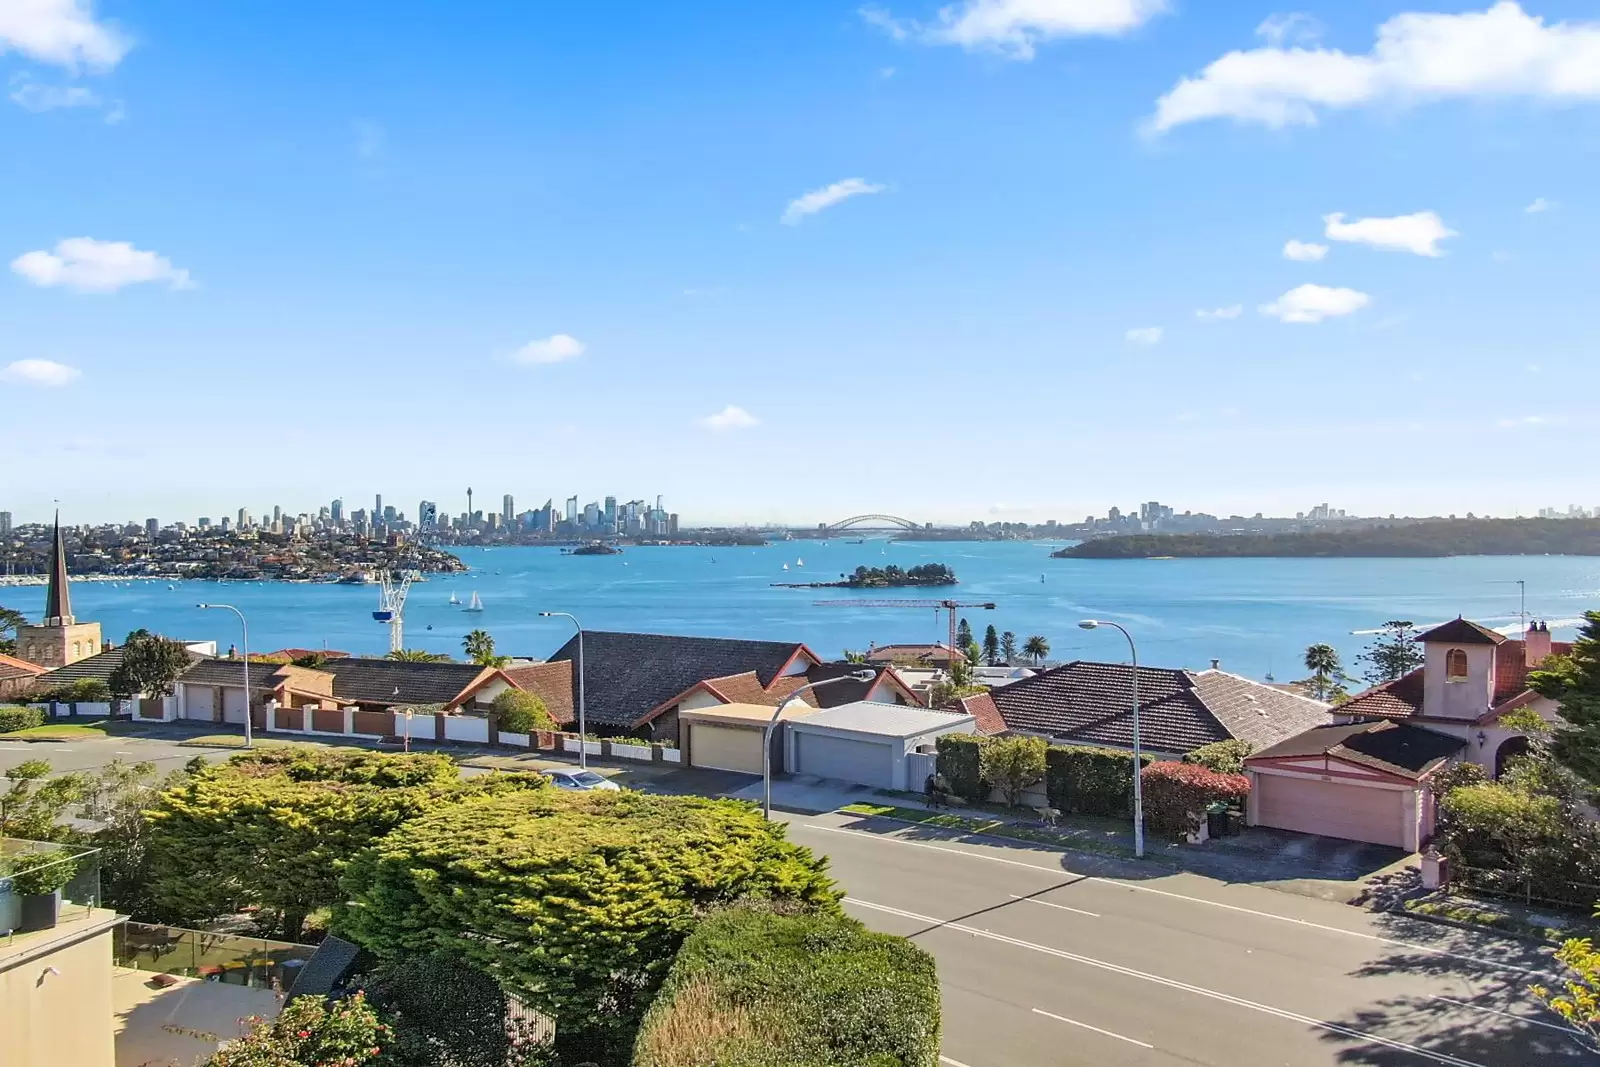 Photo #3: 35 New South Head Road, Vaucluse - For Sale by Sydney Sotheby's International Realty